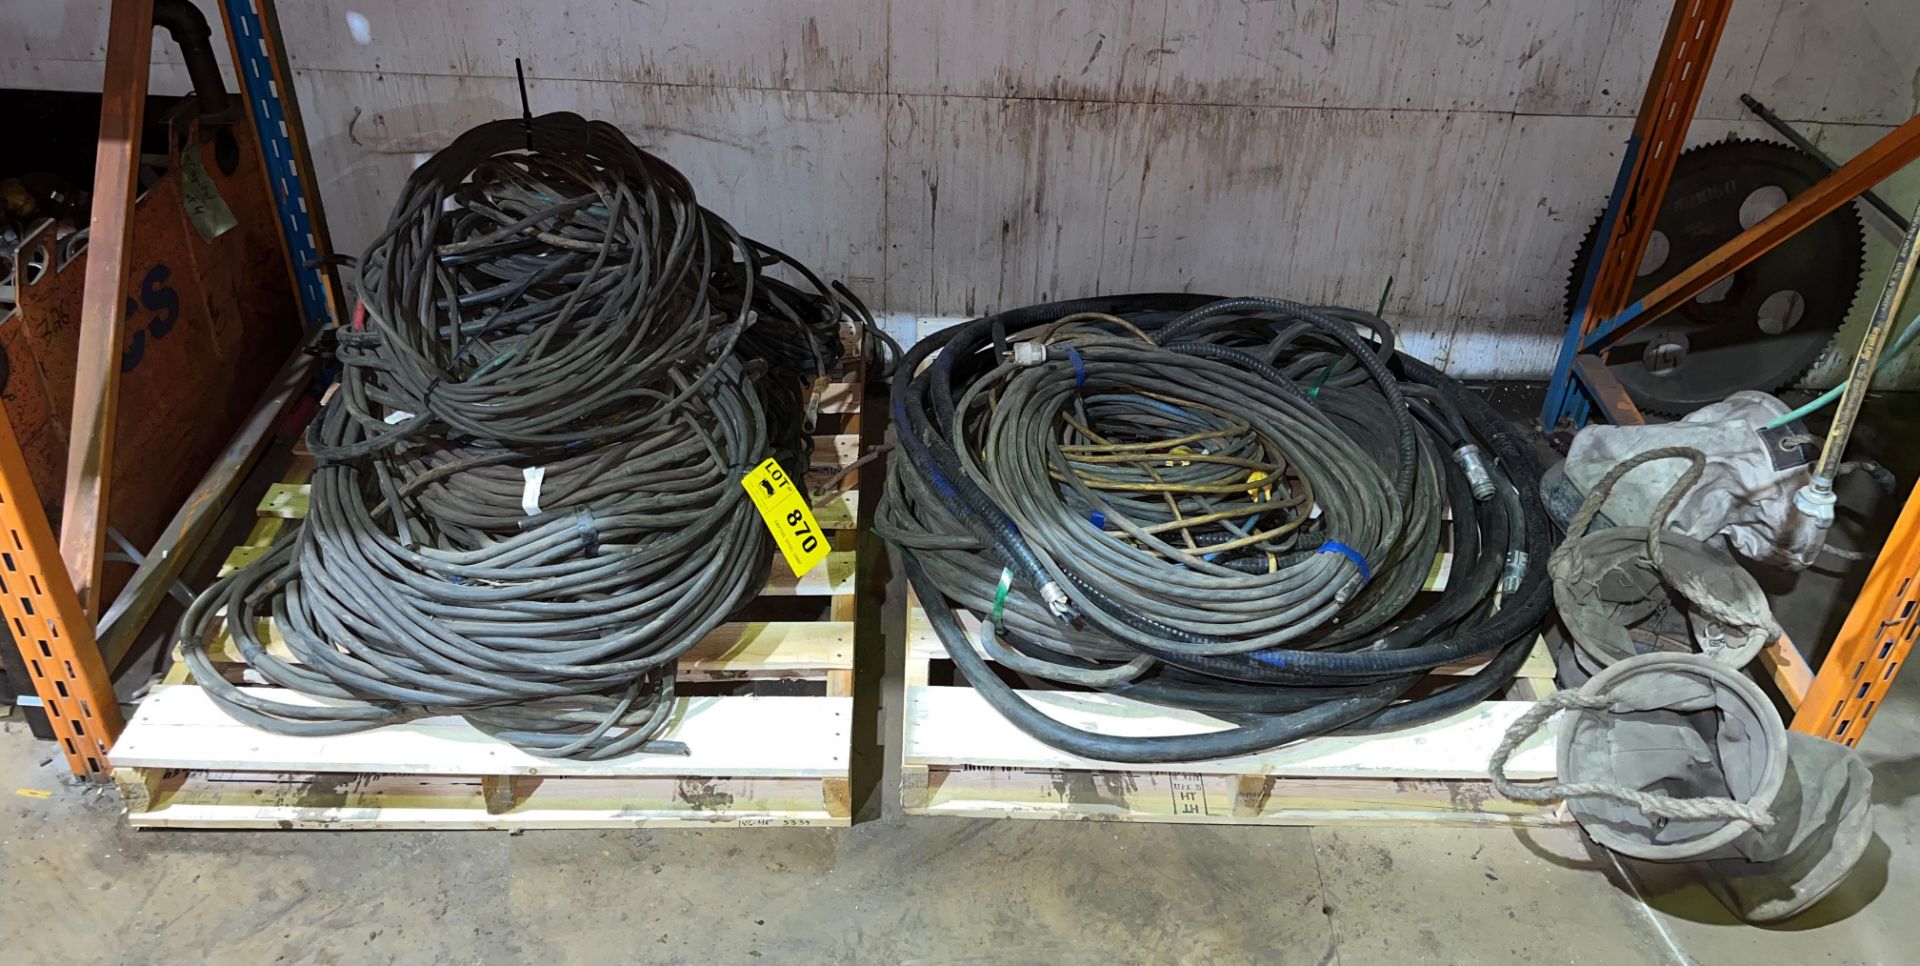 LOT/ STEEL BIN WITH, CABLES, HOSES [RIGGING FEES FOR LOT #870 - $40 USD PLUS APPLICABLE TAXES]